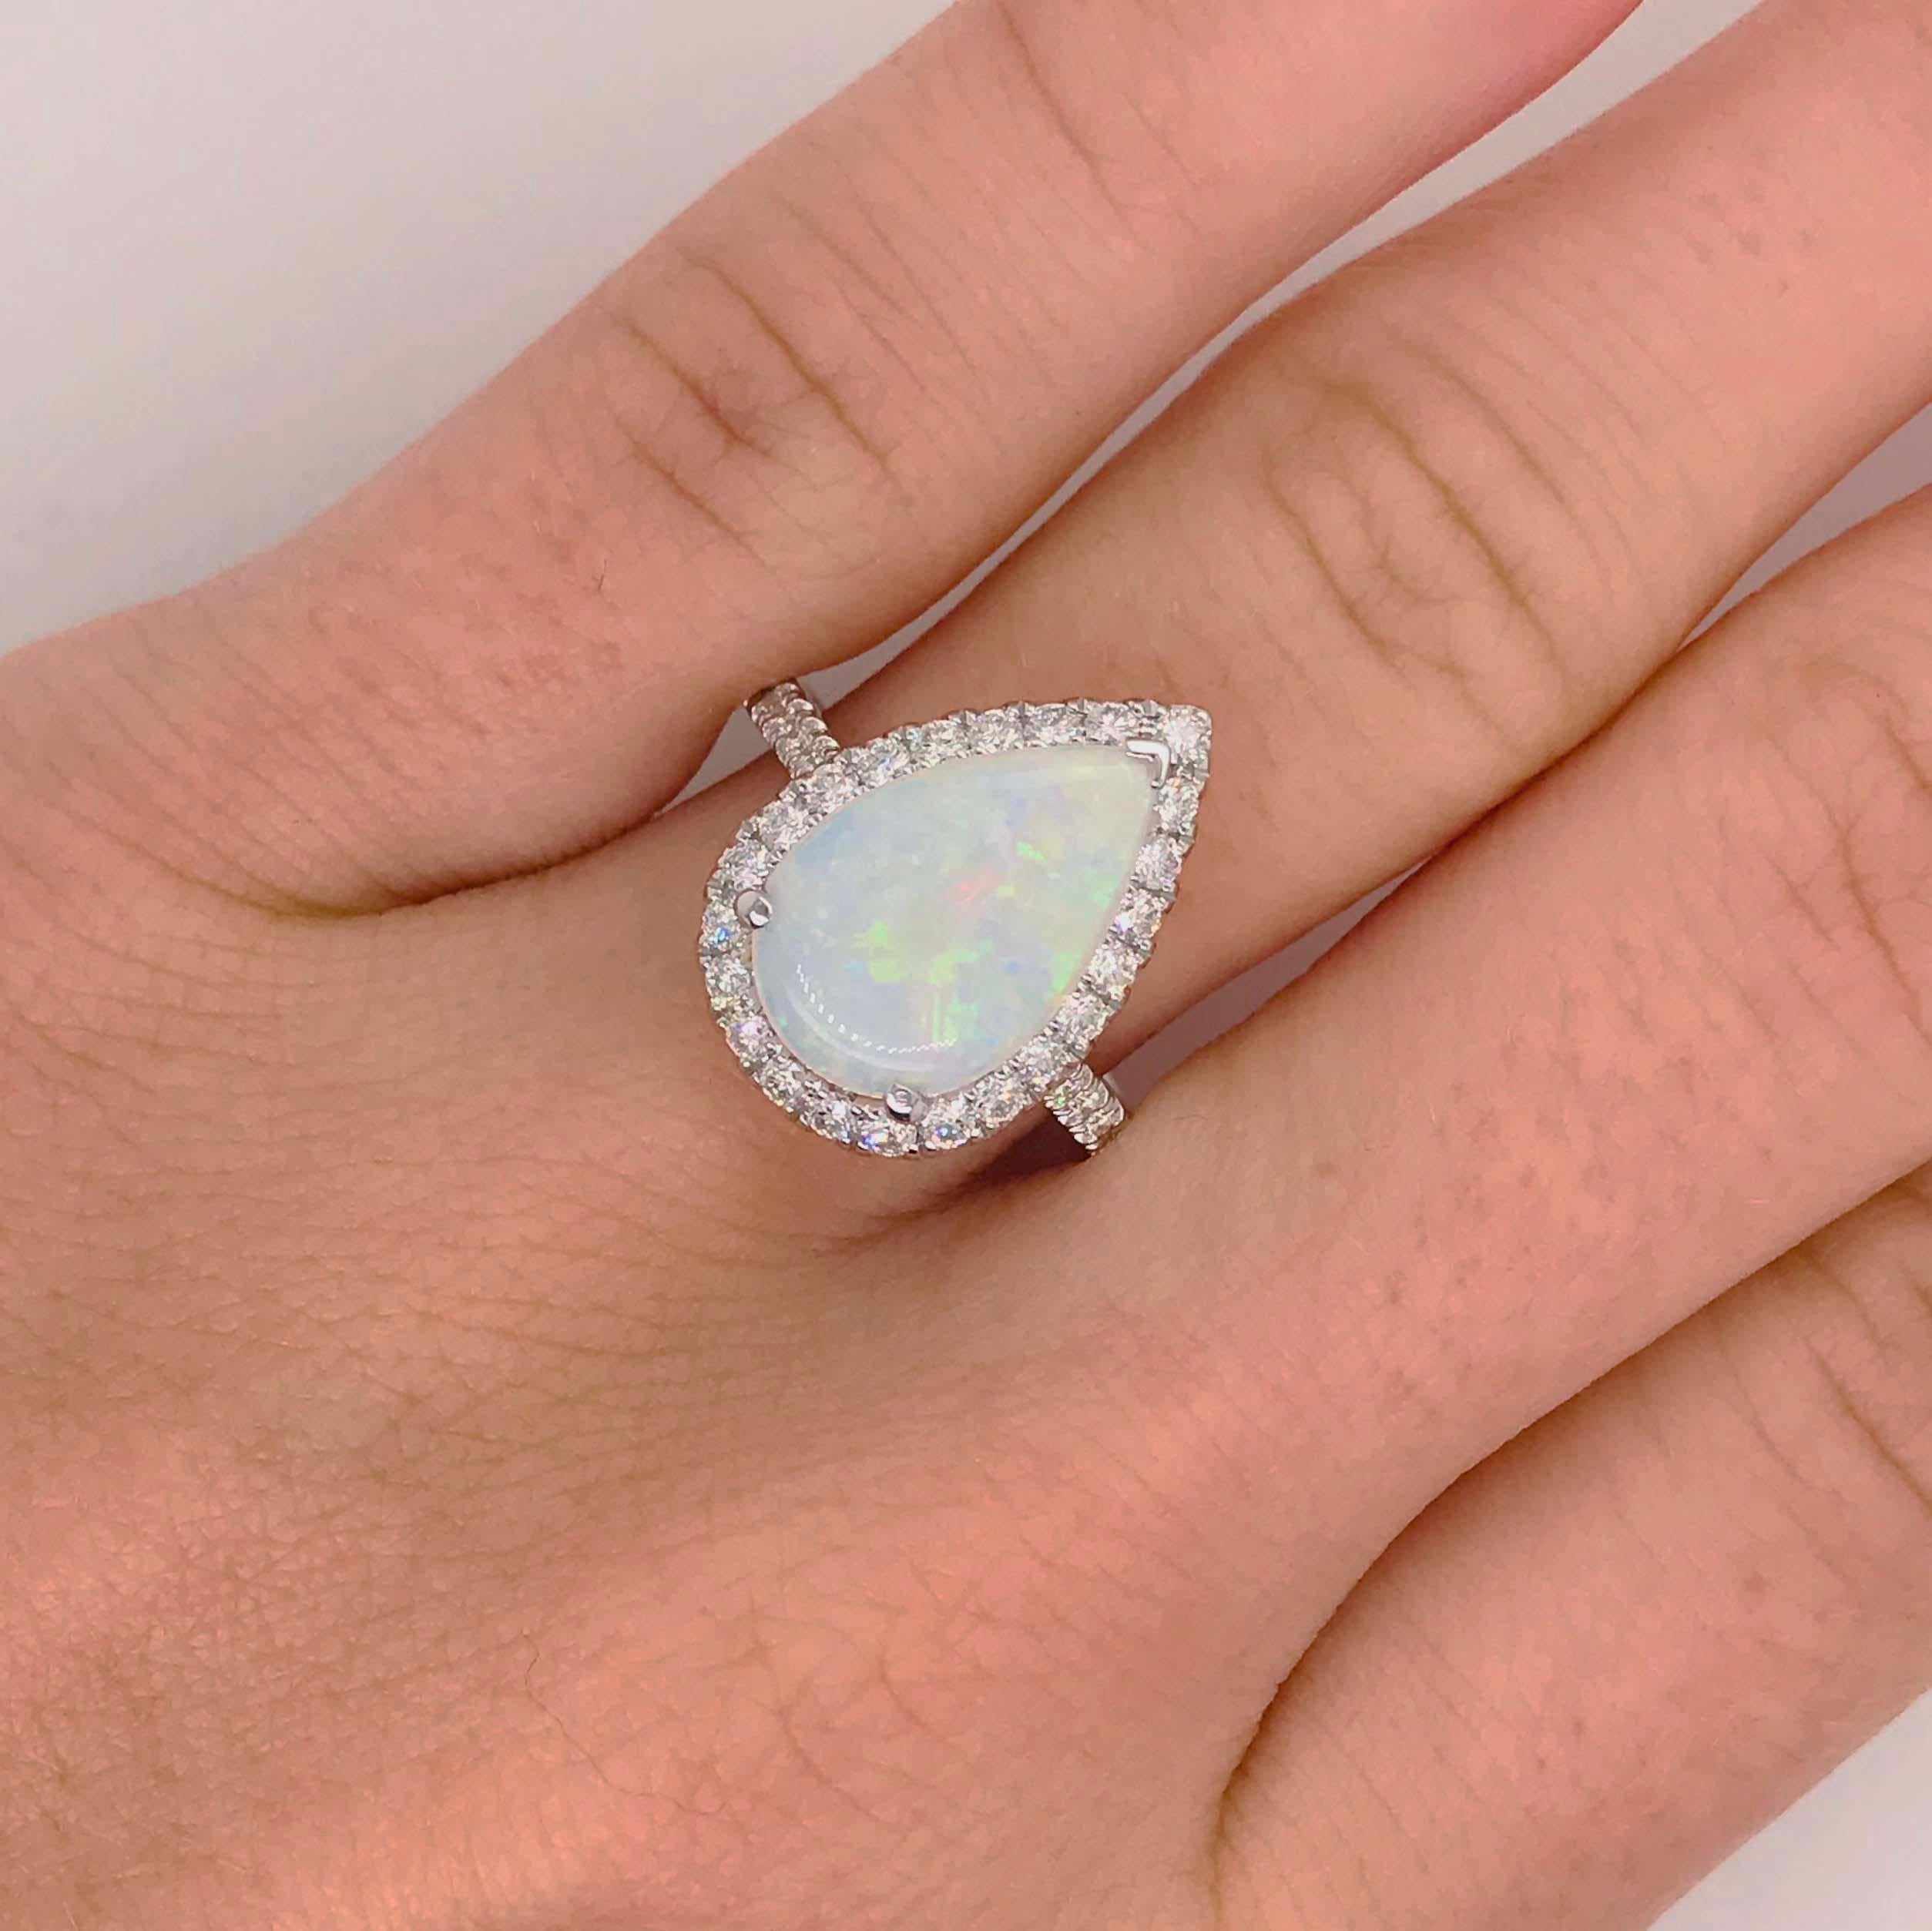 Stunning Australian opal set in a unique designer setting! This bold ring has a pear shaped Australian opal gemstone set in three prongs with one 